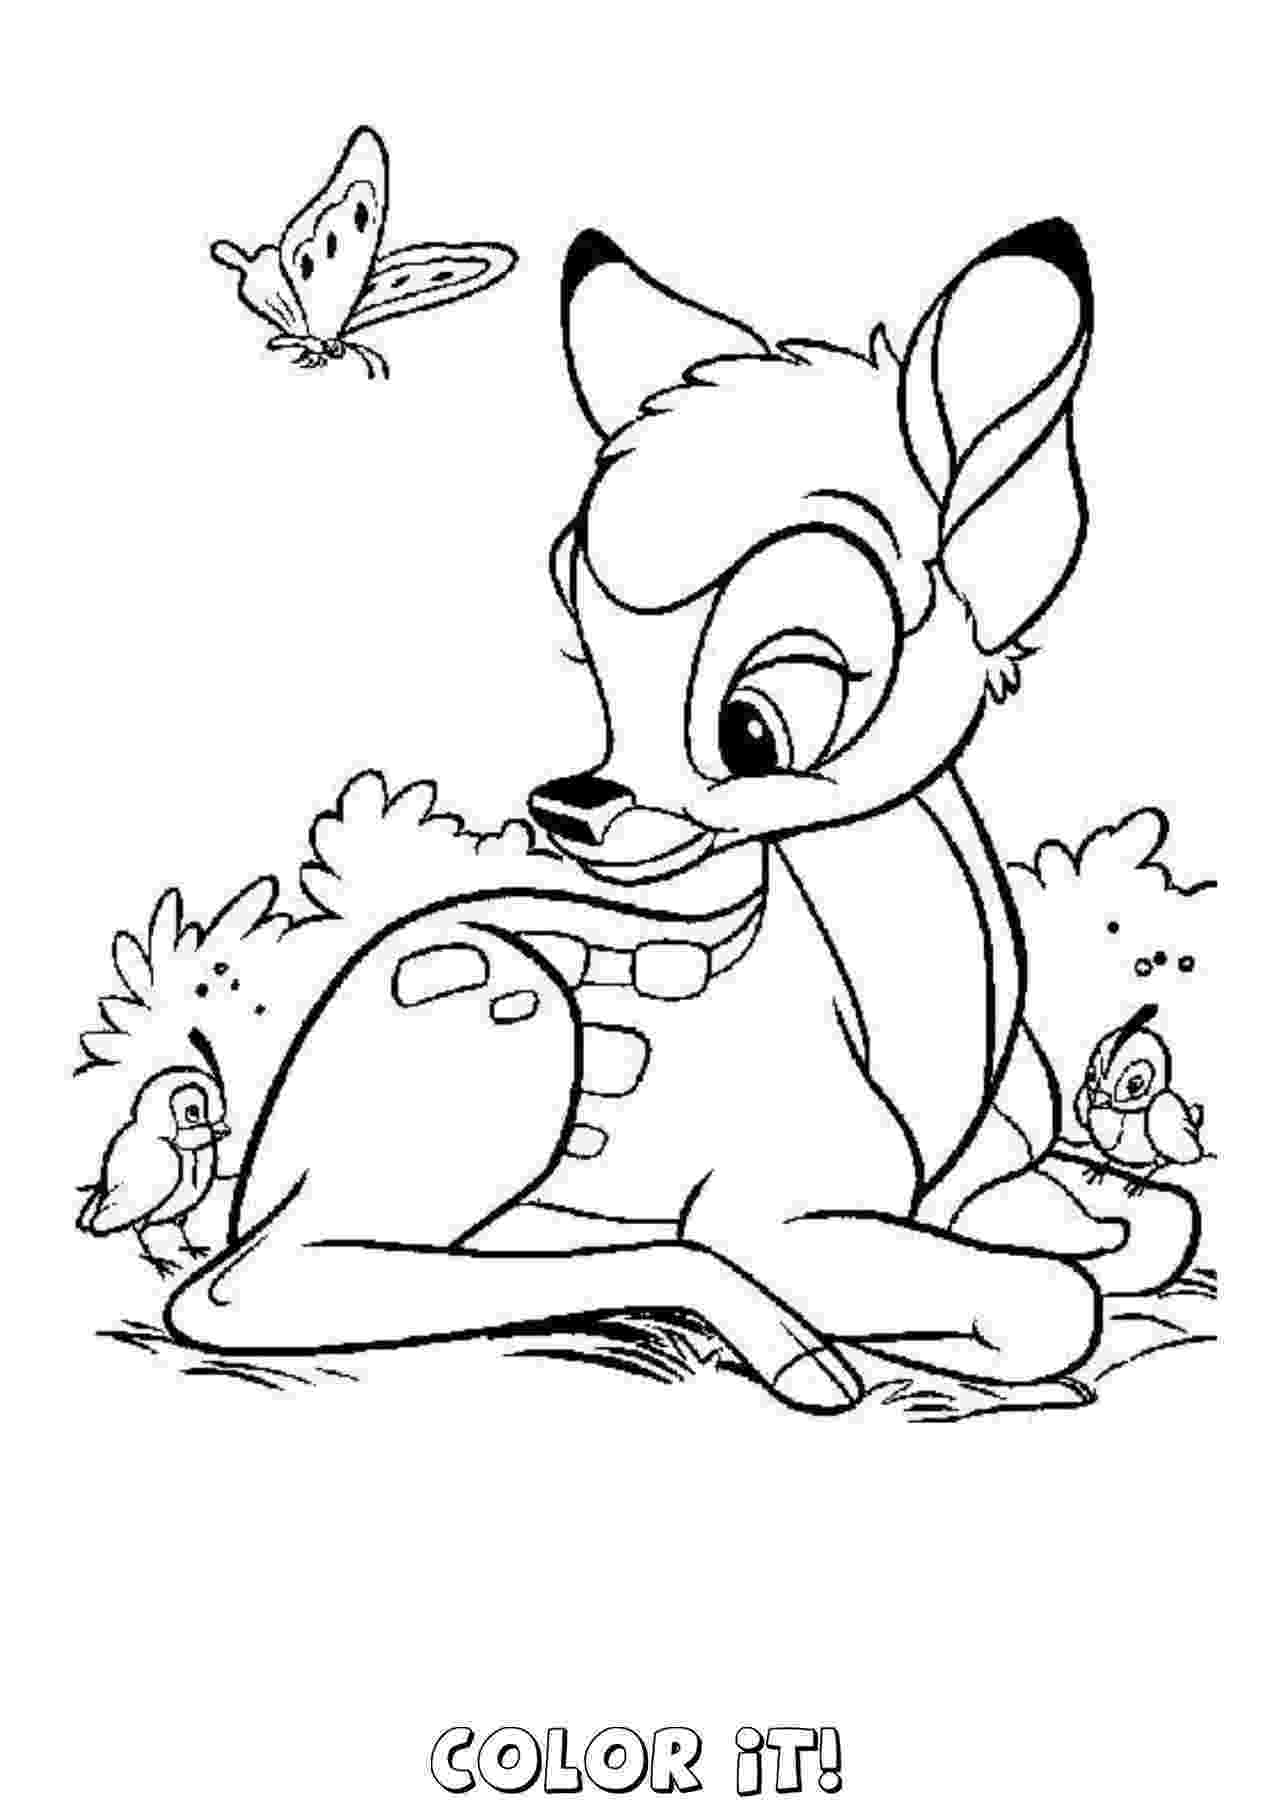 disney coloring book free download childrens disney coloring pages download and print for free download coloring disney book free 